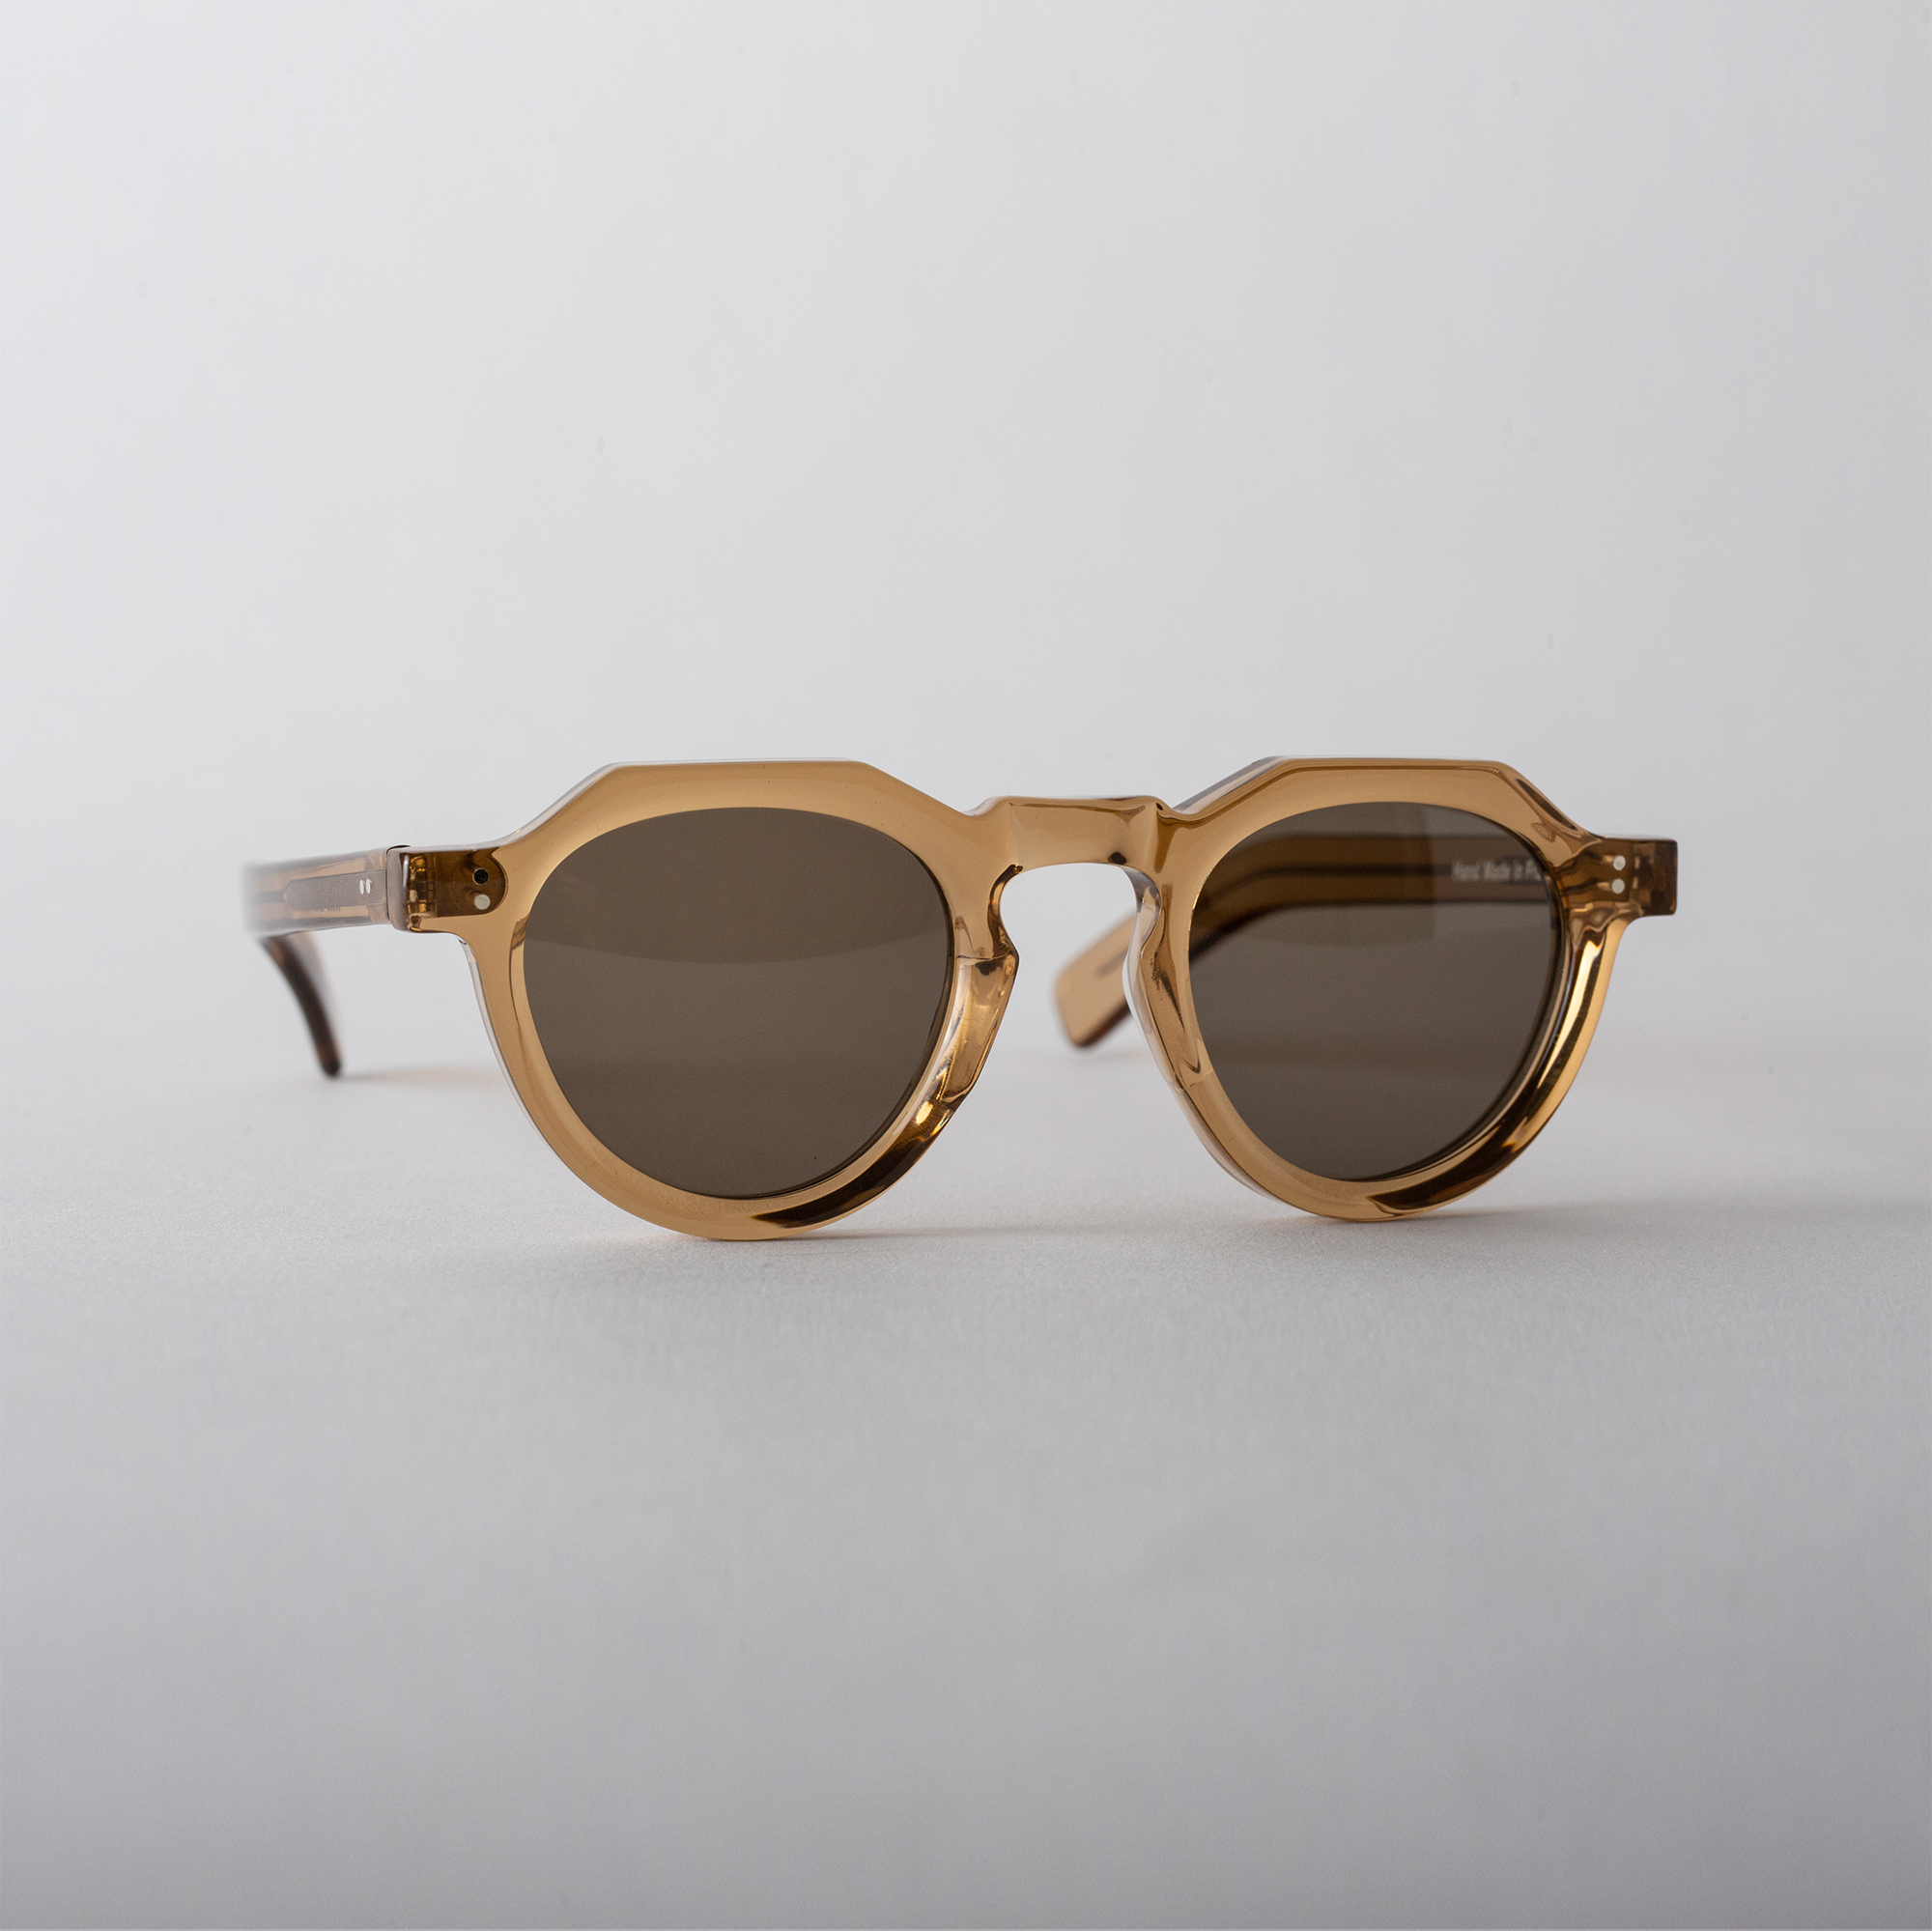 Sunglasses MOD.01 in Champagne color by Arpenteur